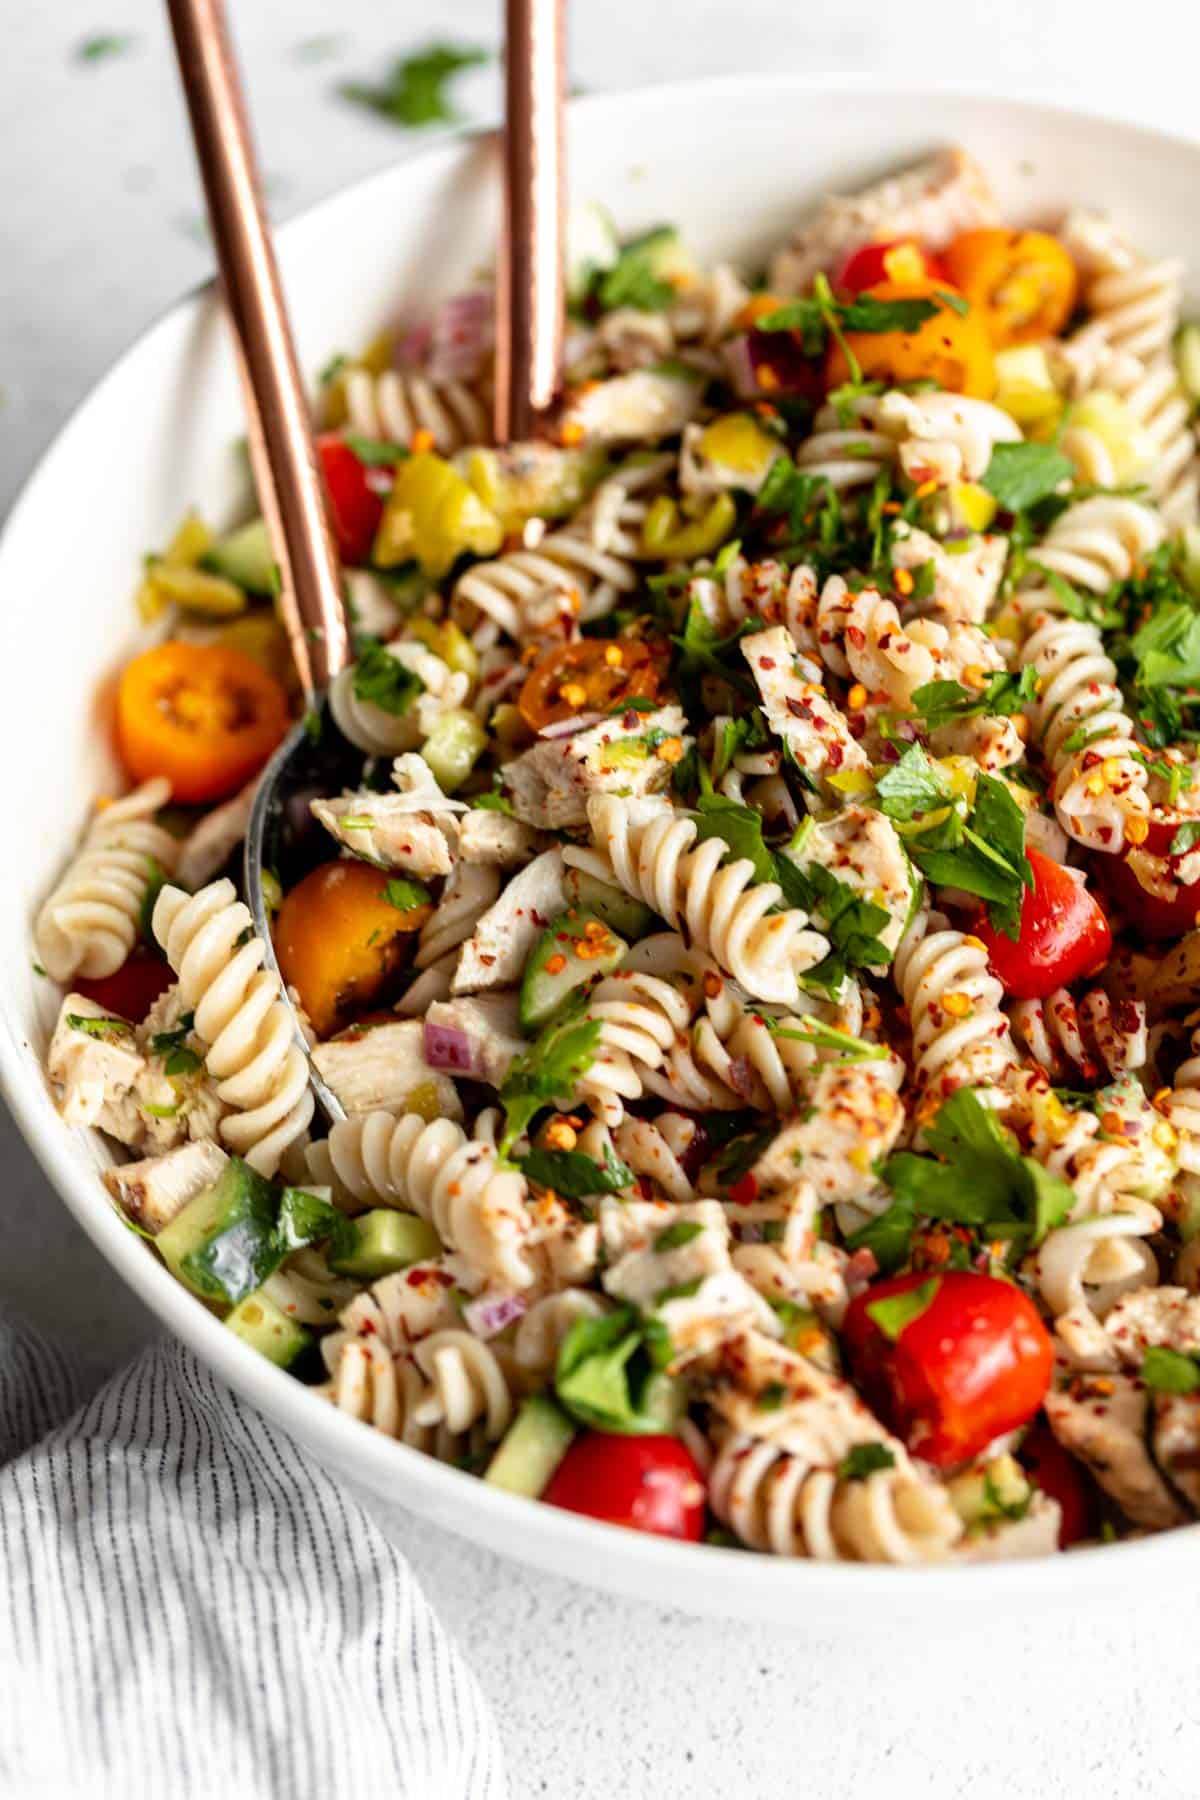 angled view of the gluten free pasta salad with veggies and chicken